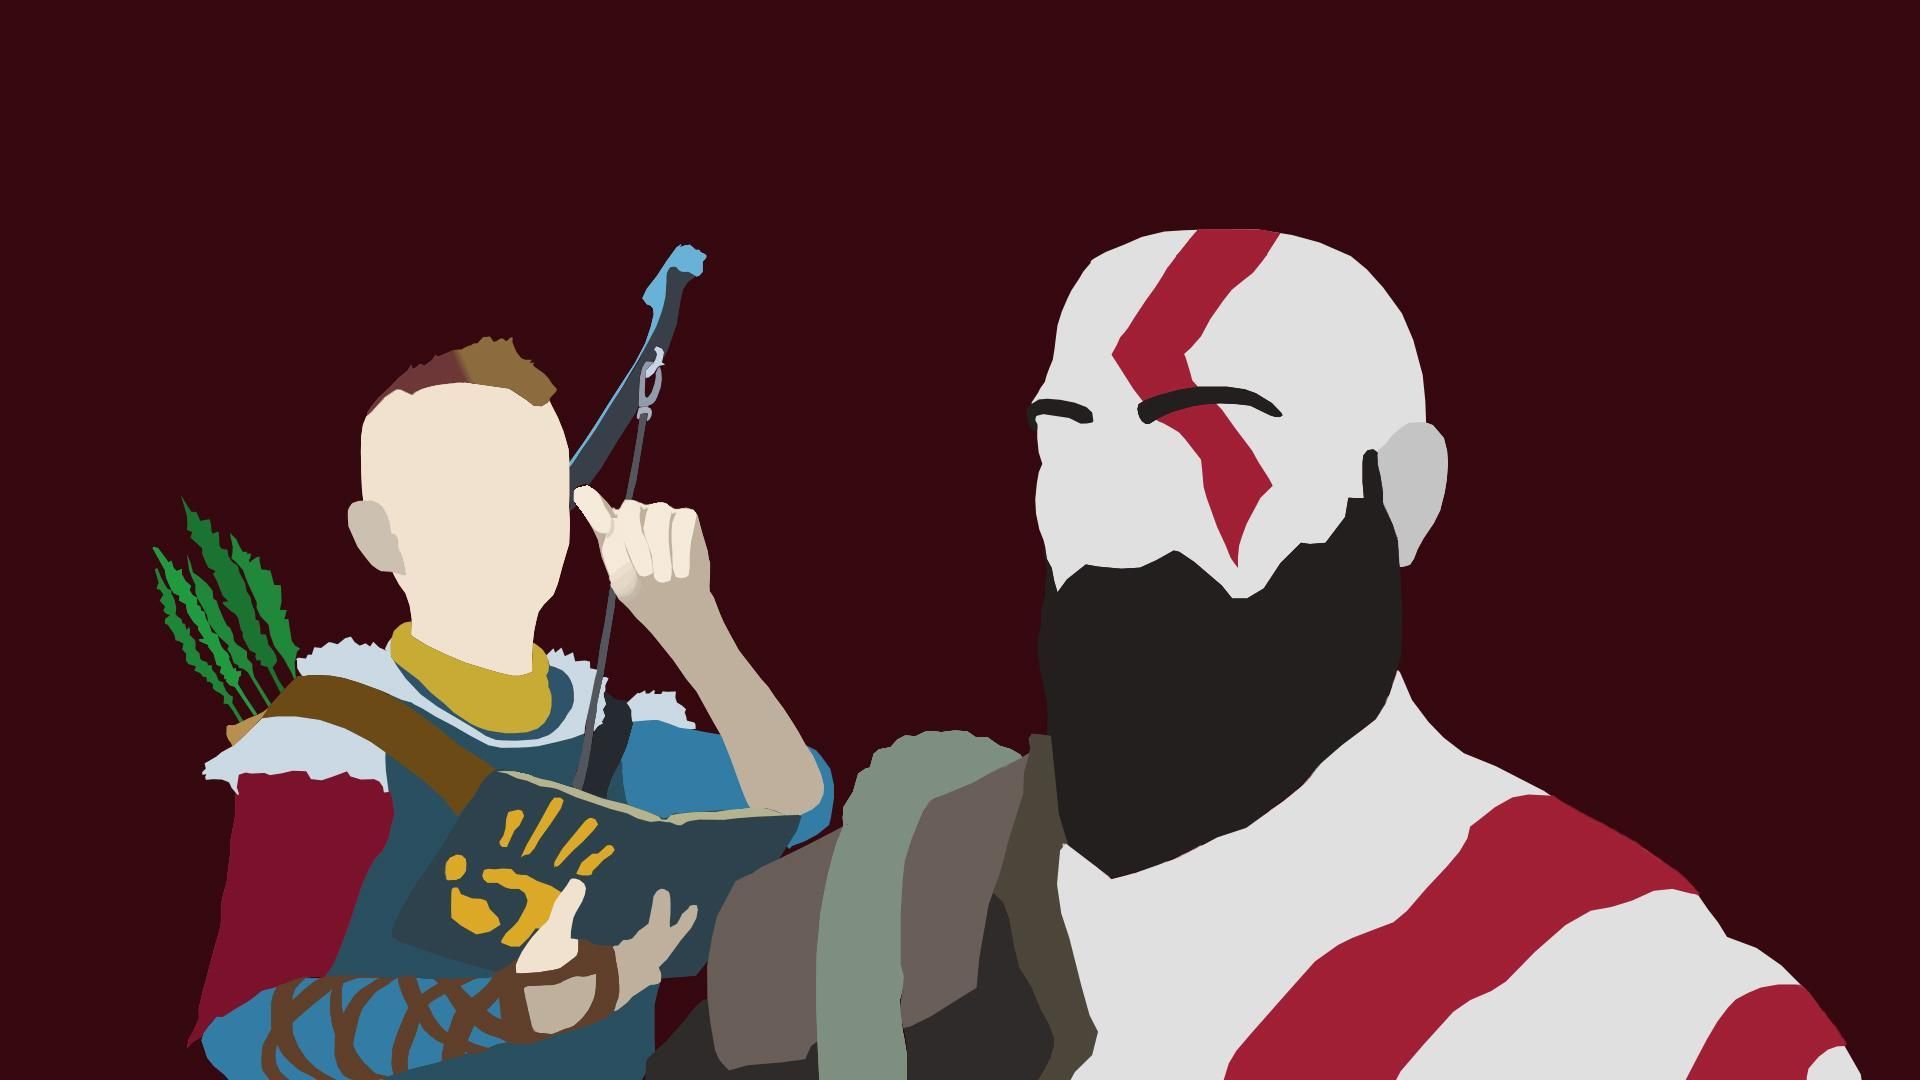 I made a minimalist wallpaper of Kratos and Atreus from God of War